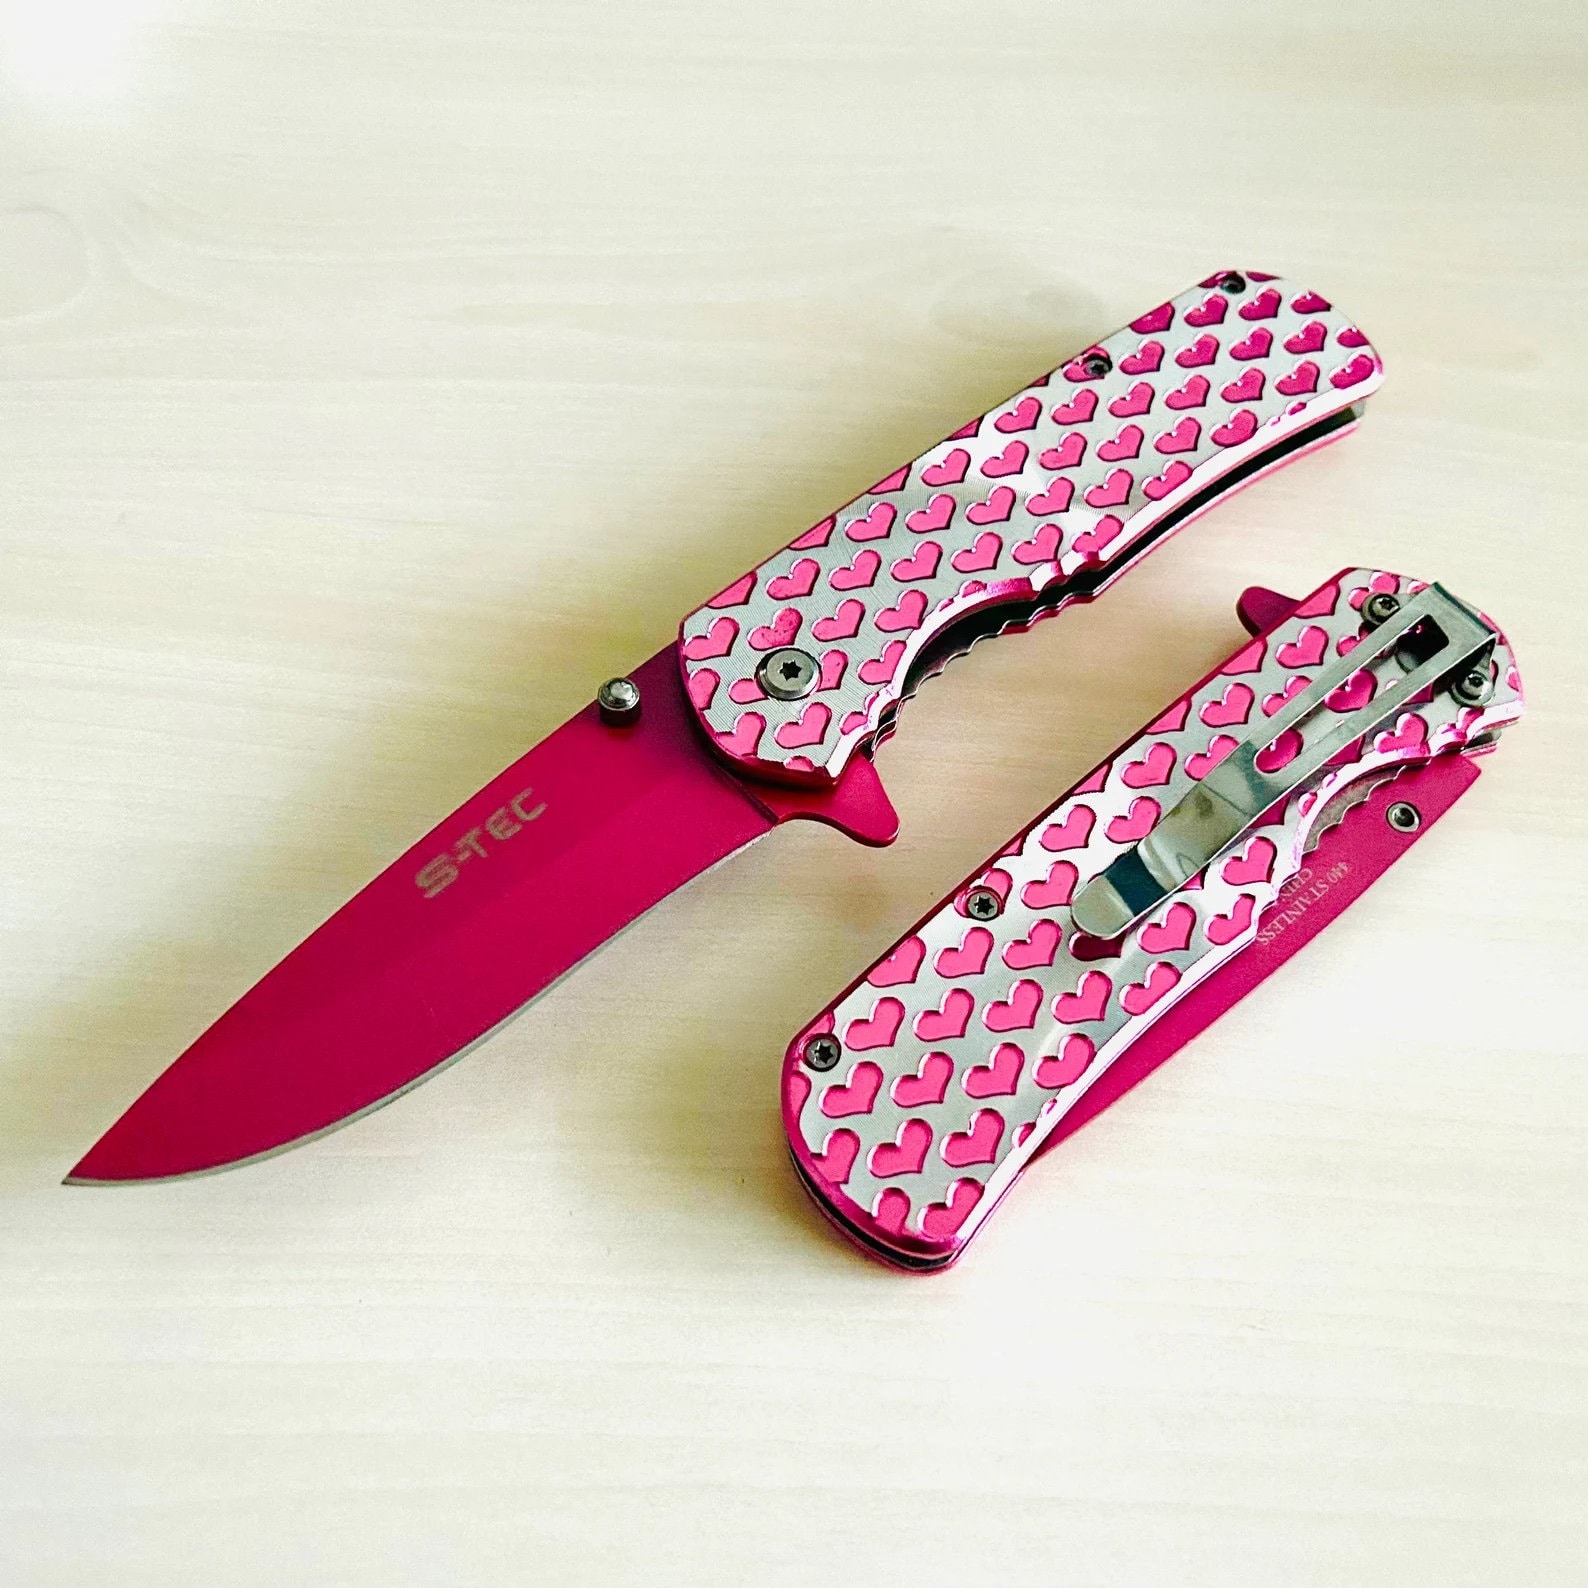  Pink Pocket Knife for Women - Legal Small Knife - 2.68 Inch  Serrated Blade - Womens Knife for Self Defense - Cute Girl Knife - Survival  Tool Pocket & Folding Knives 